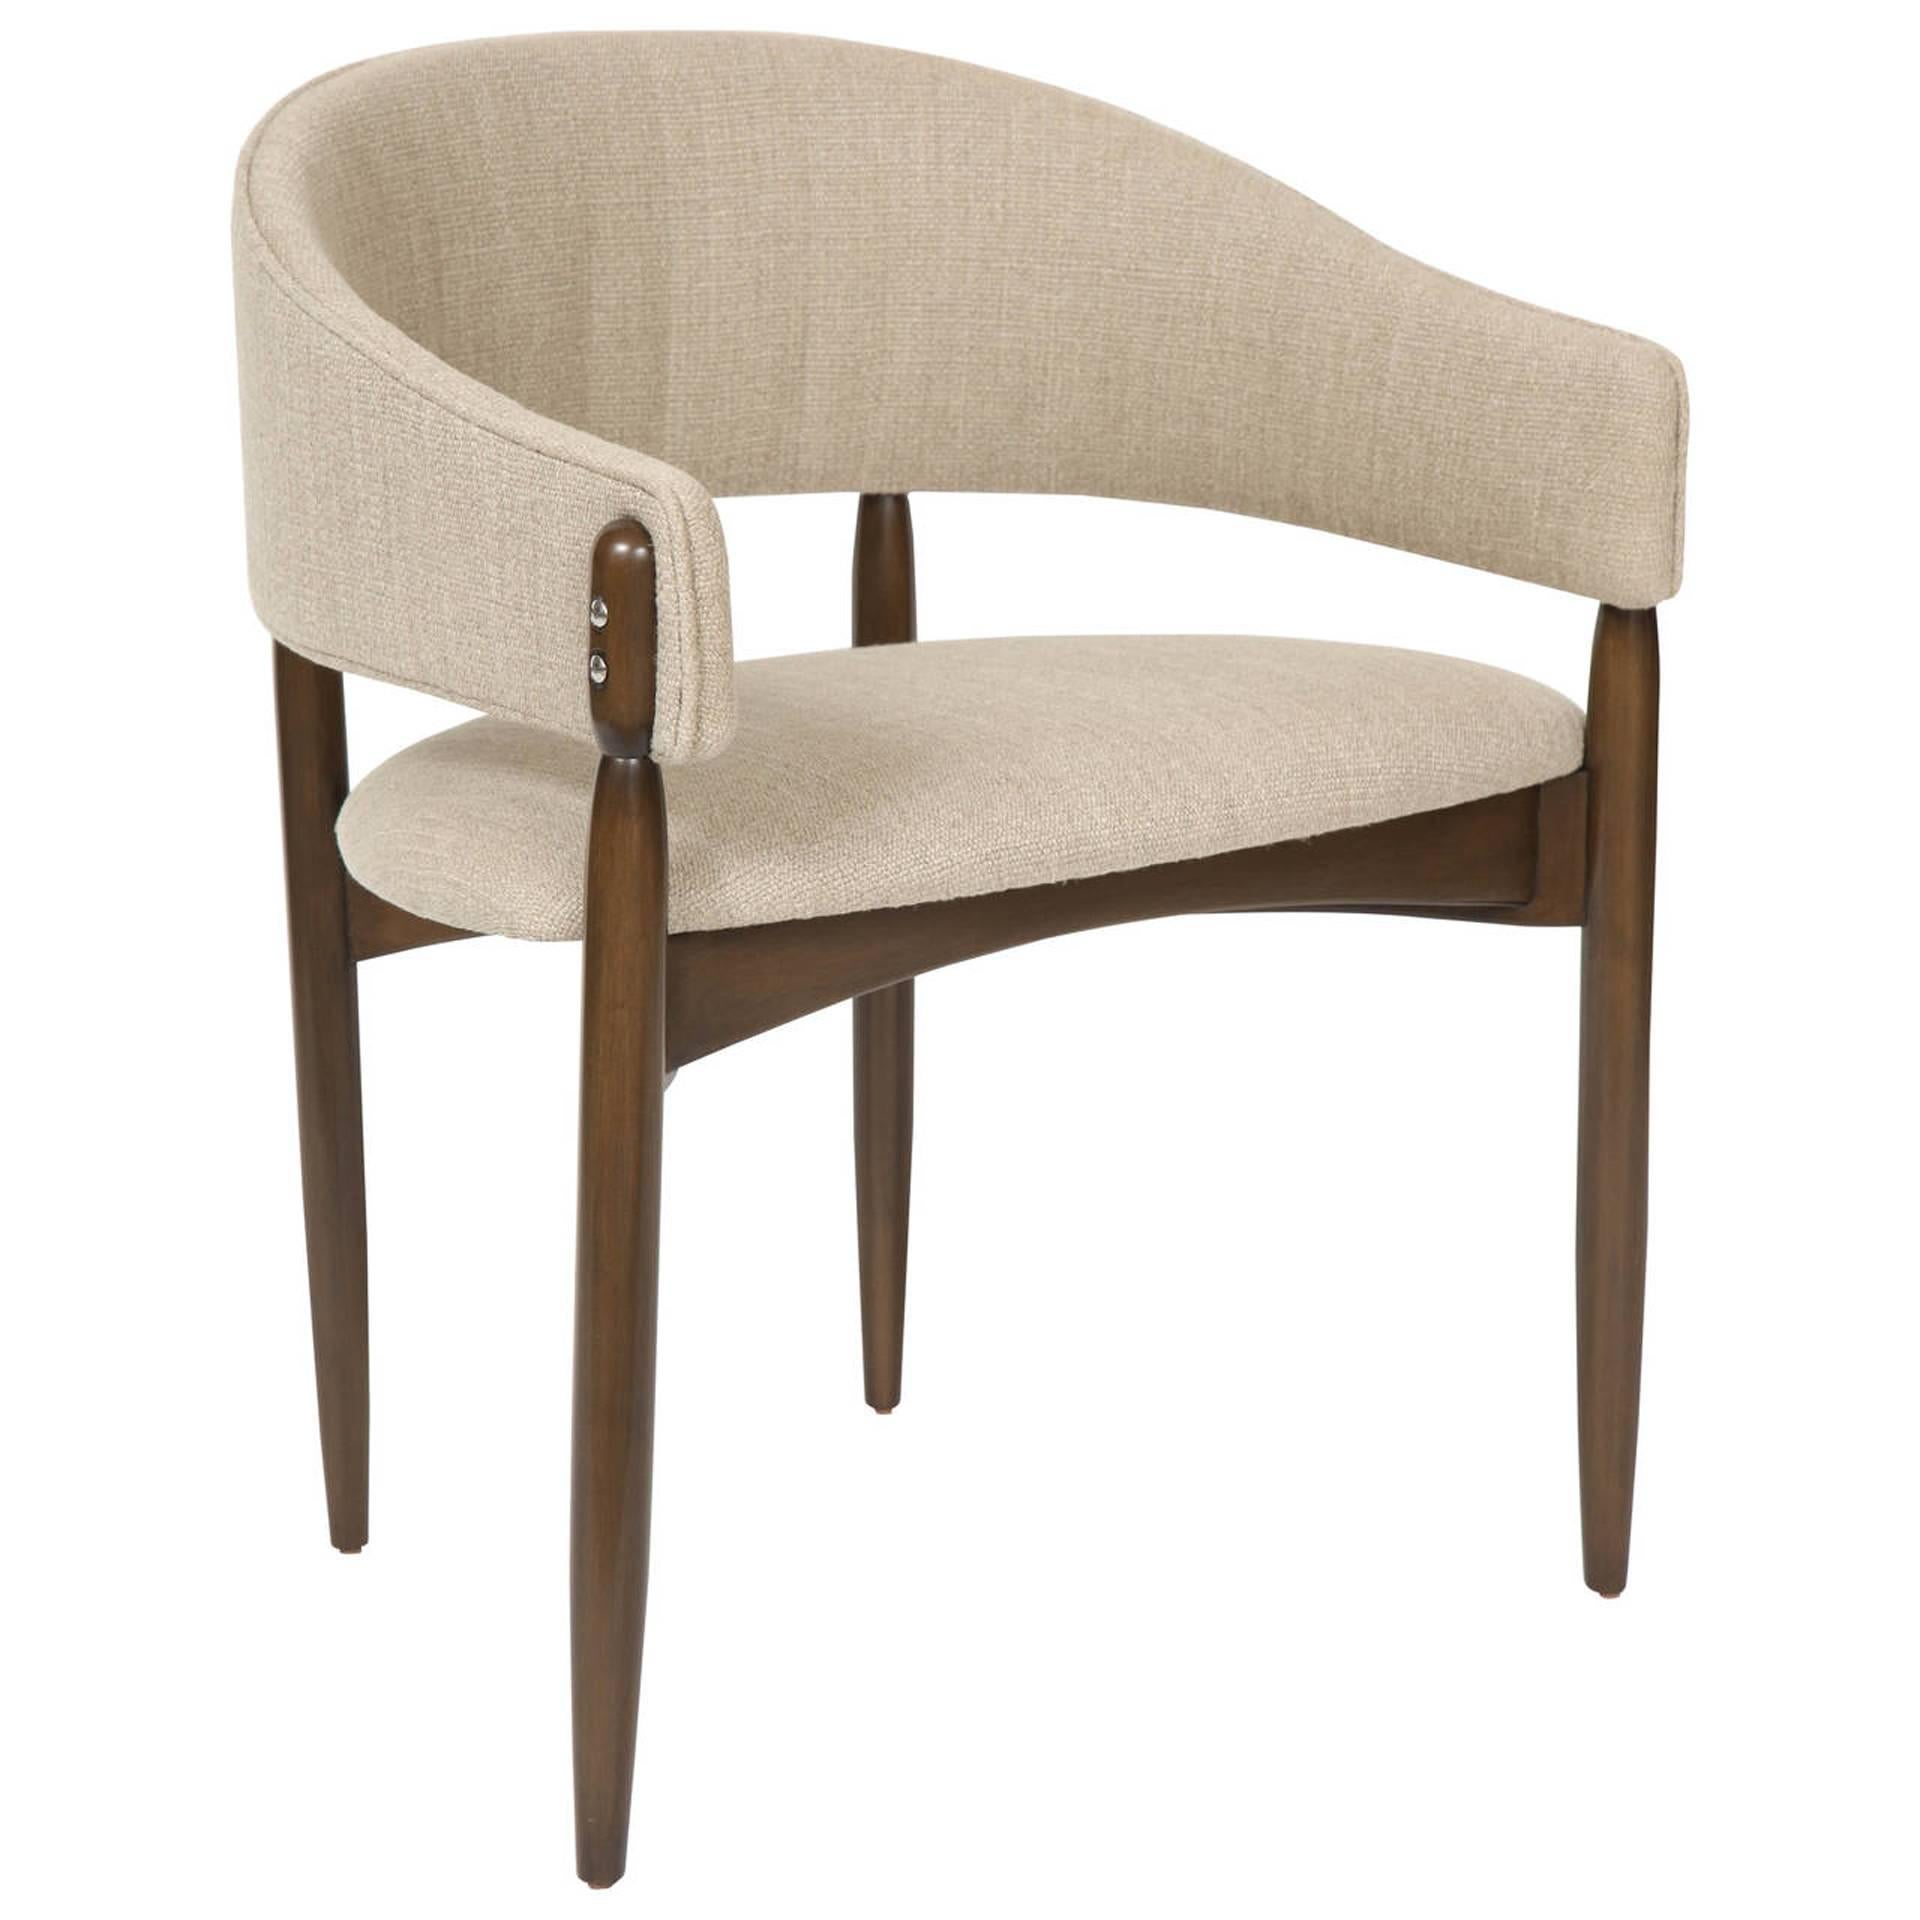 Enroth dining chair.
Seat height-18”. 
Seat depth -18.5”. 
COM requirements: 2yards. 
5% up-charge for contrasting fabrics and or welting. 
COL requirements: 40 sq. feet. 
5% percentage up-charge for all COL or exotic materials. 

Custom